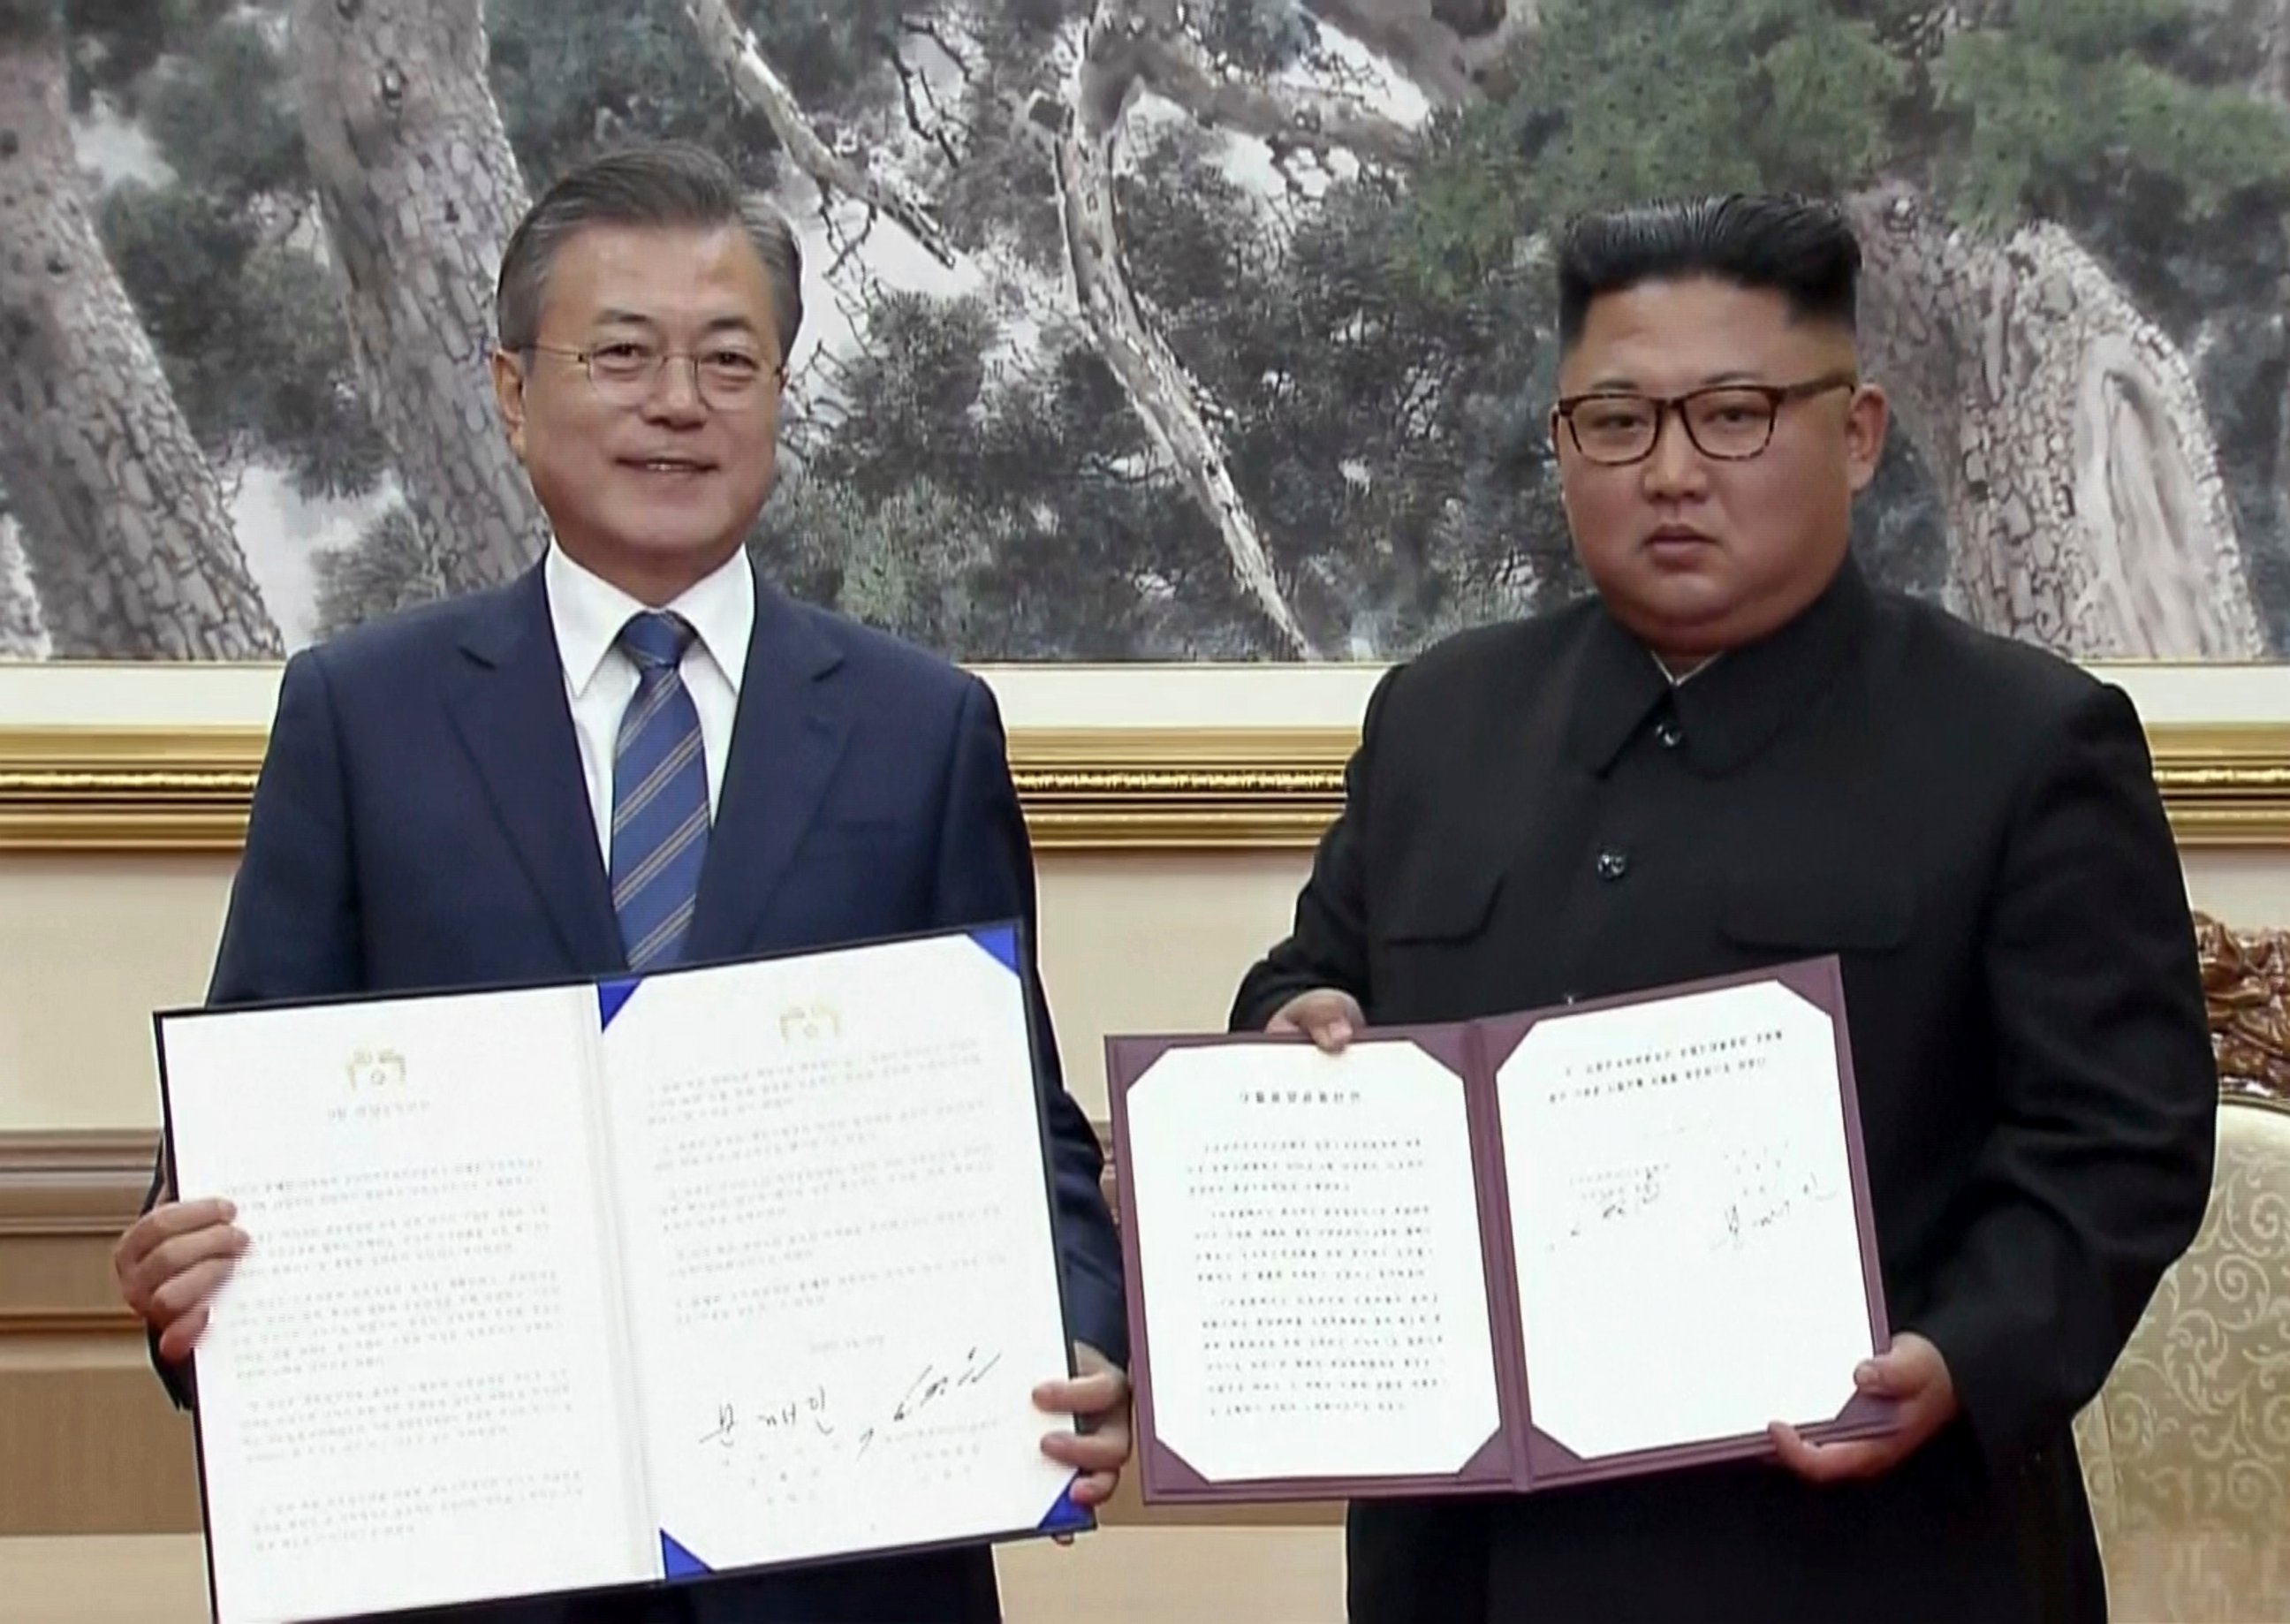 PHOTO: In this image made from video provided by Korea Broadcasting System (KBS), South Korean President Moon Jae-in, left, and North Korean leader Kim Jong Un pose after signing documents in Pyongyang, North Korea Wednesday, Sept. 19, 2018.